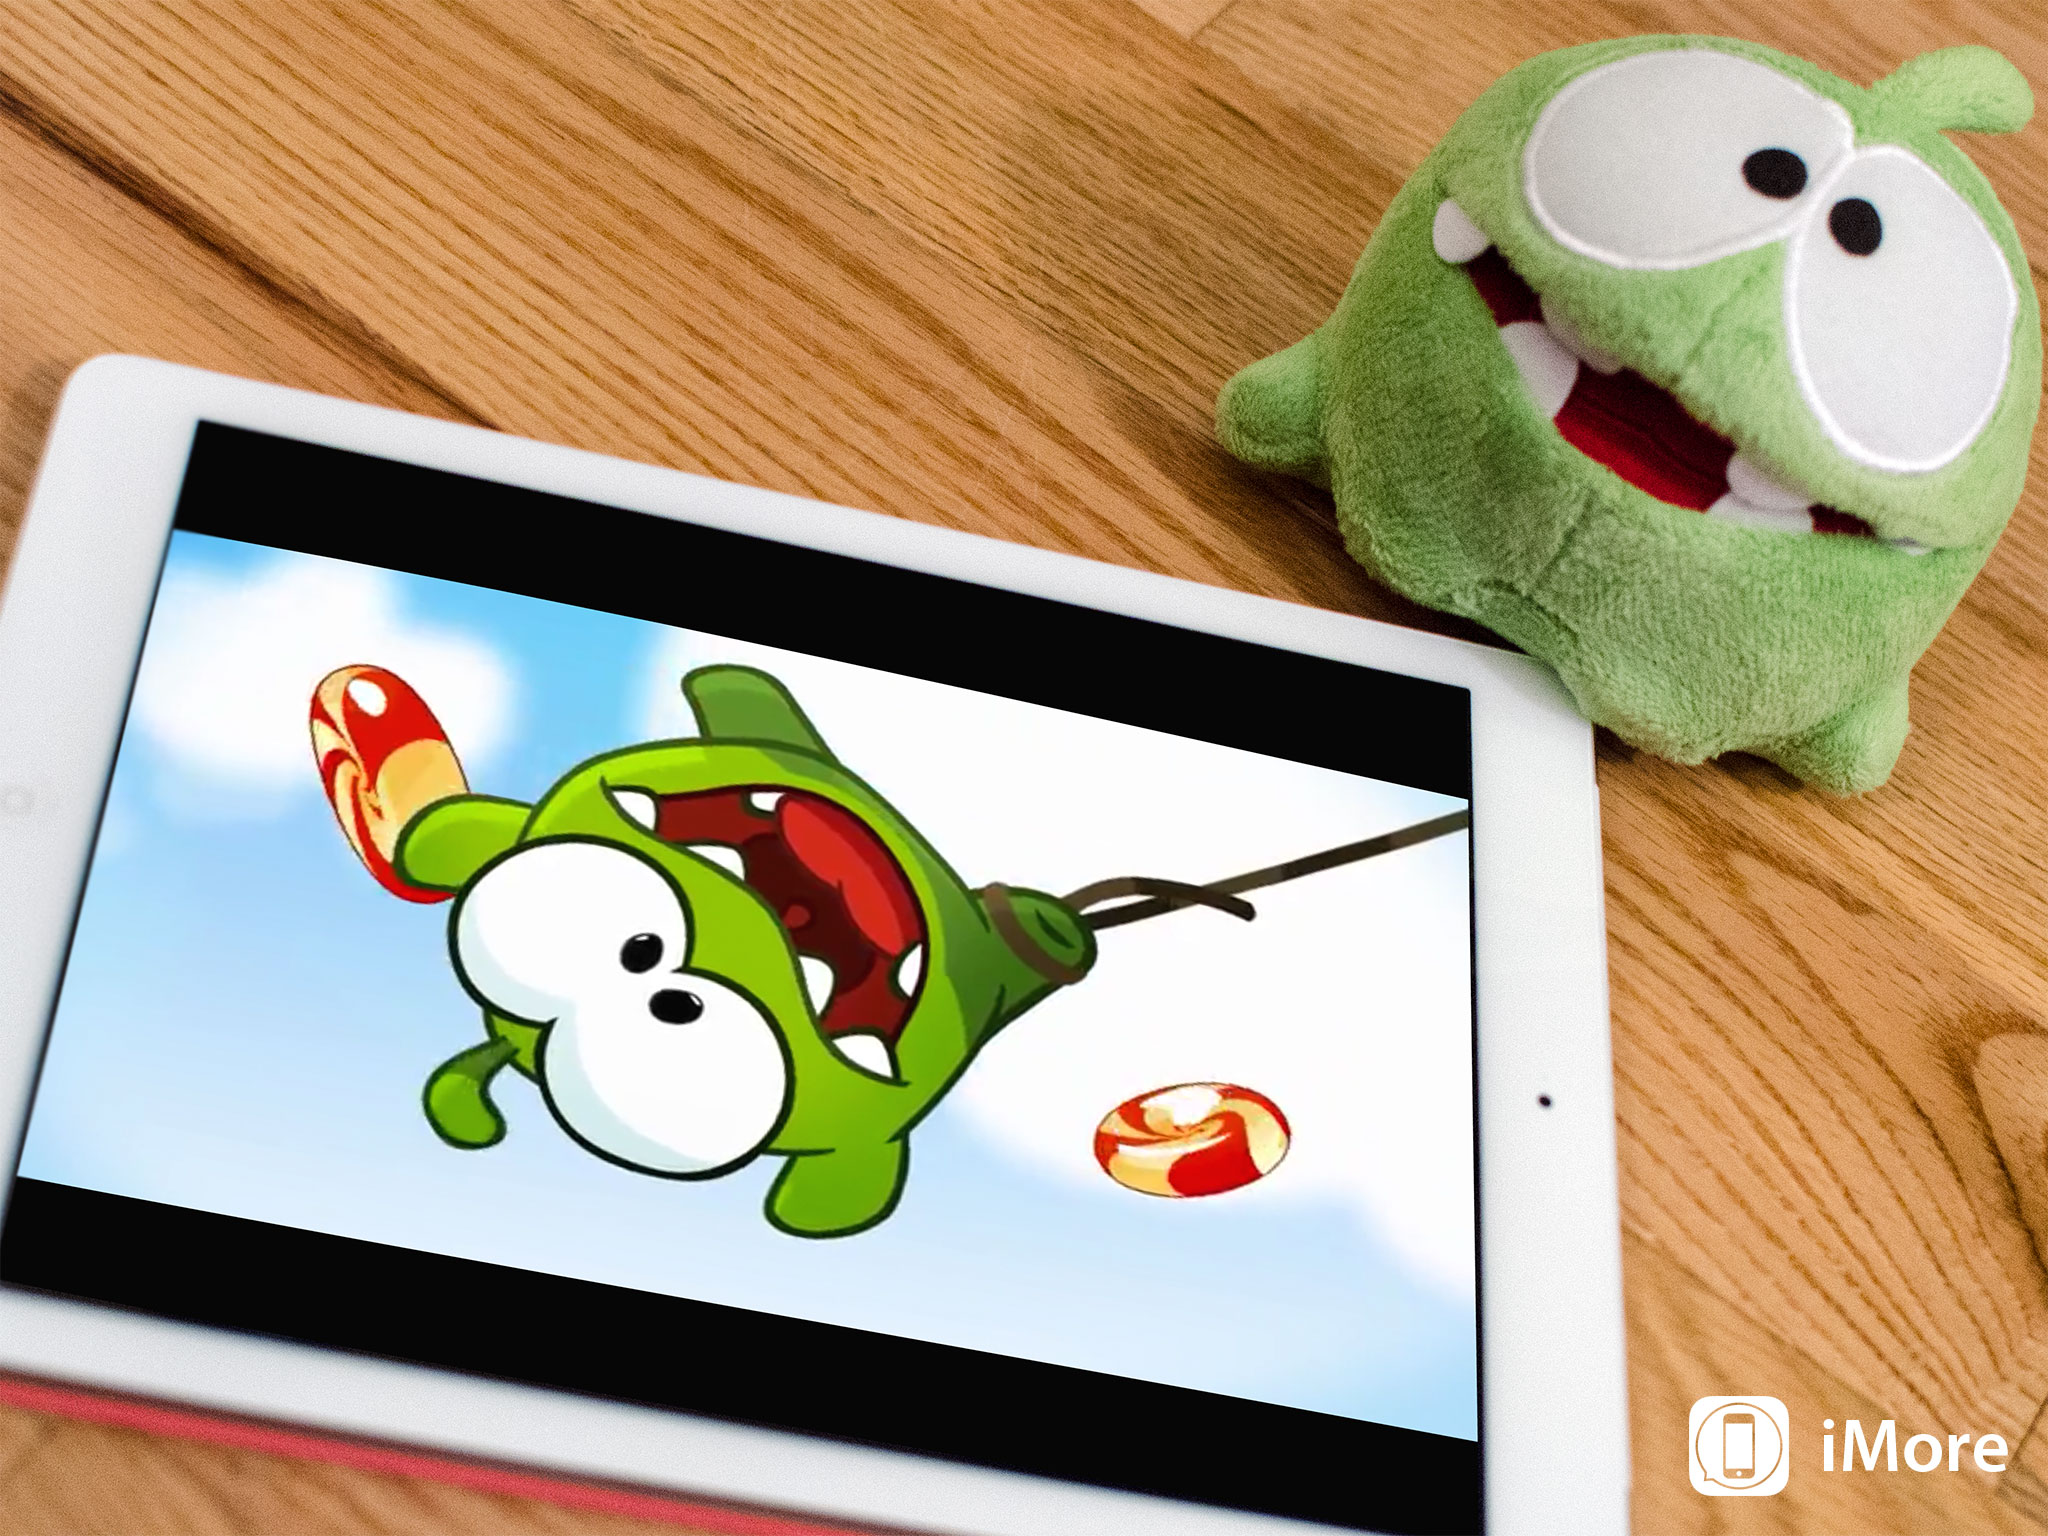 Unwrap the Secrets of Cut the Rope 2: Tips and Tricks